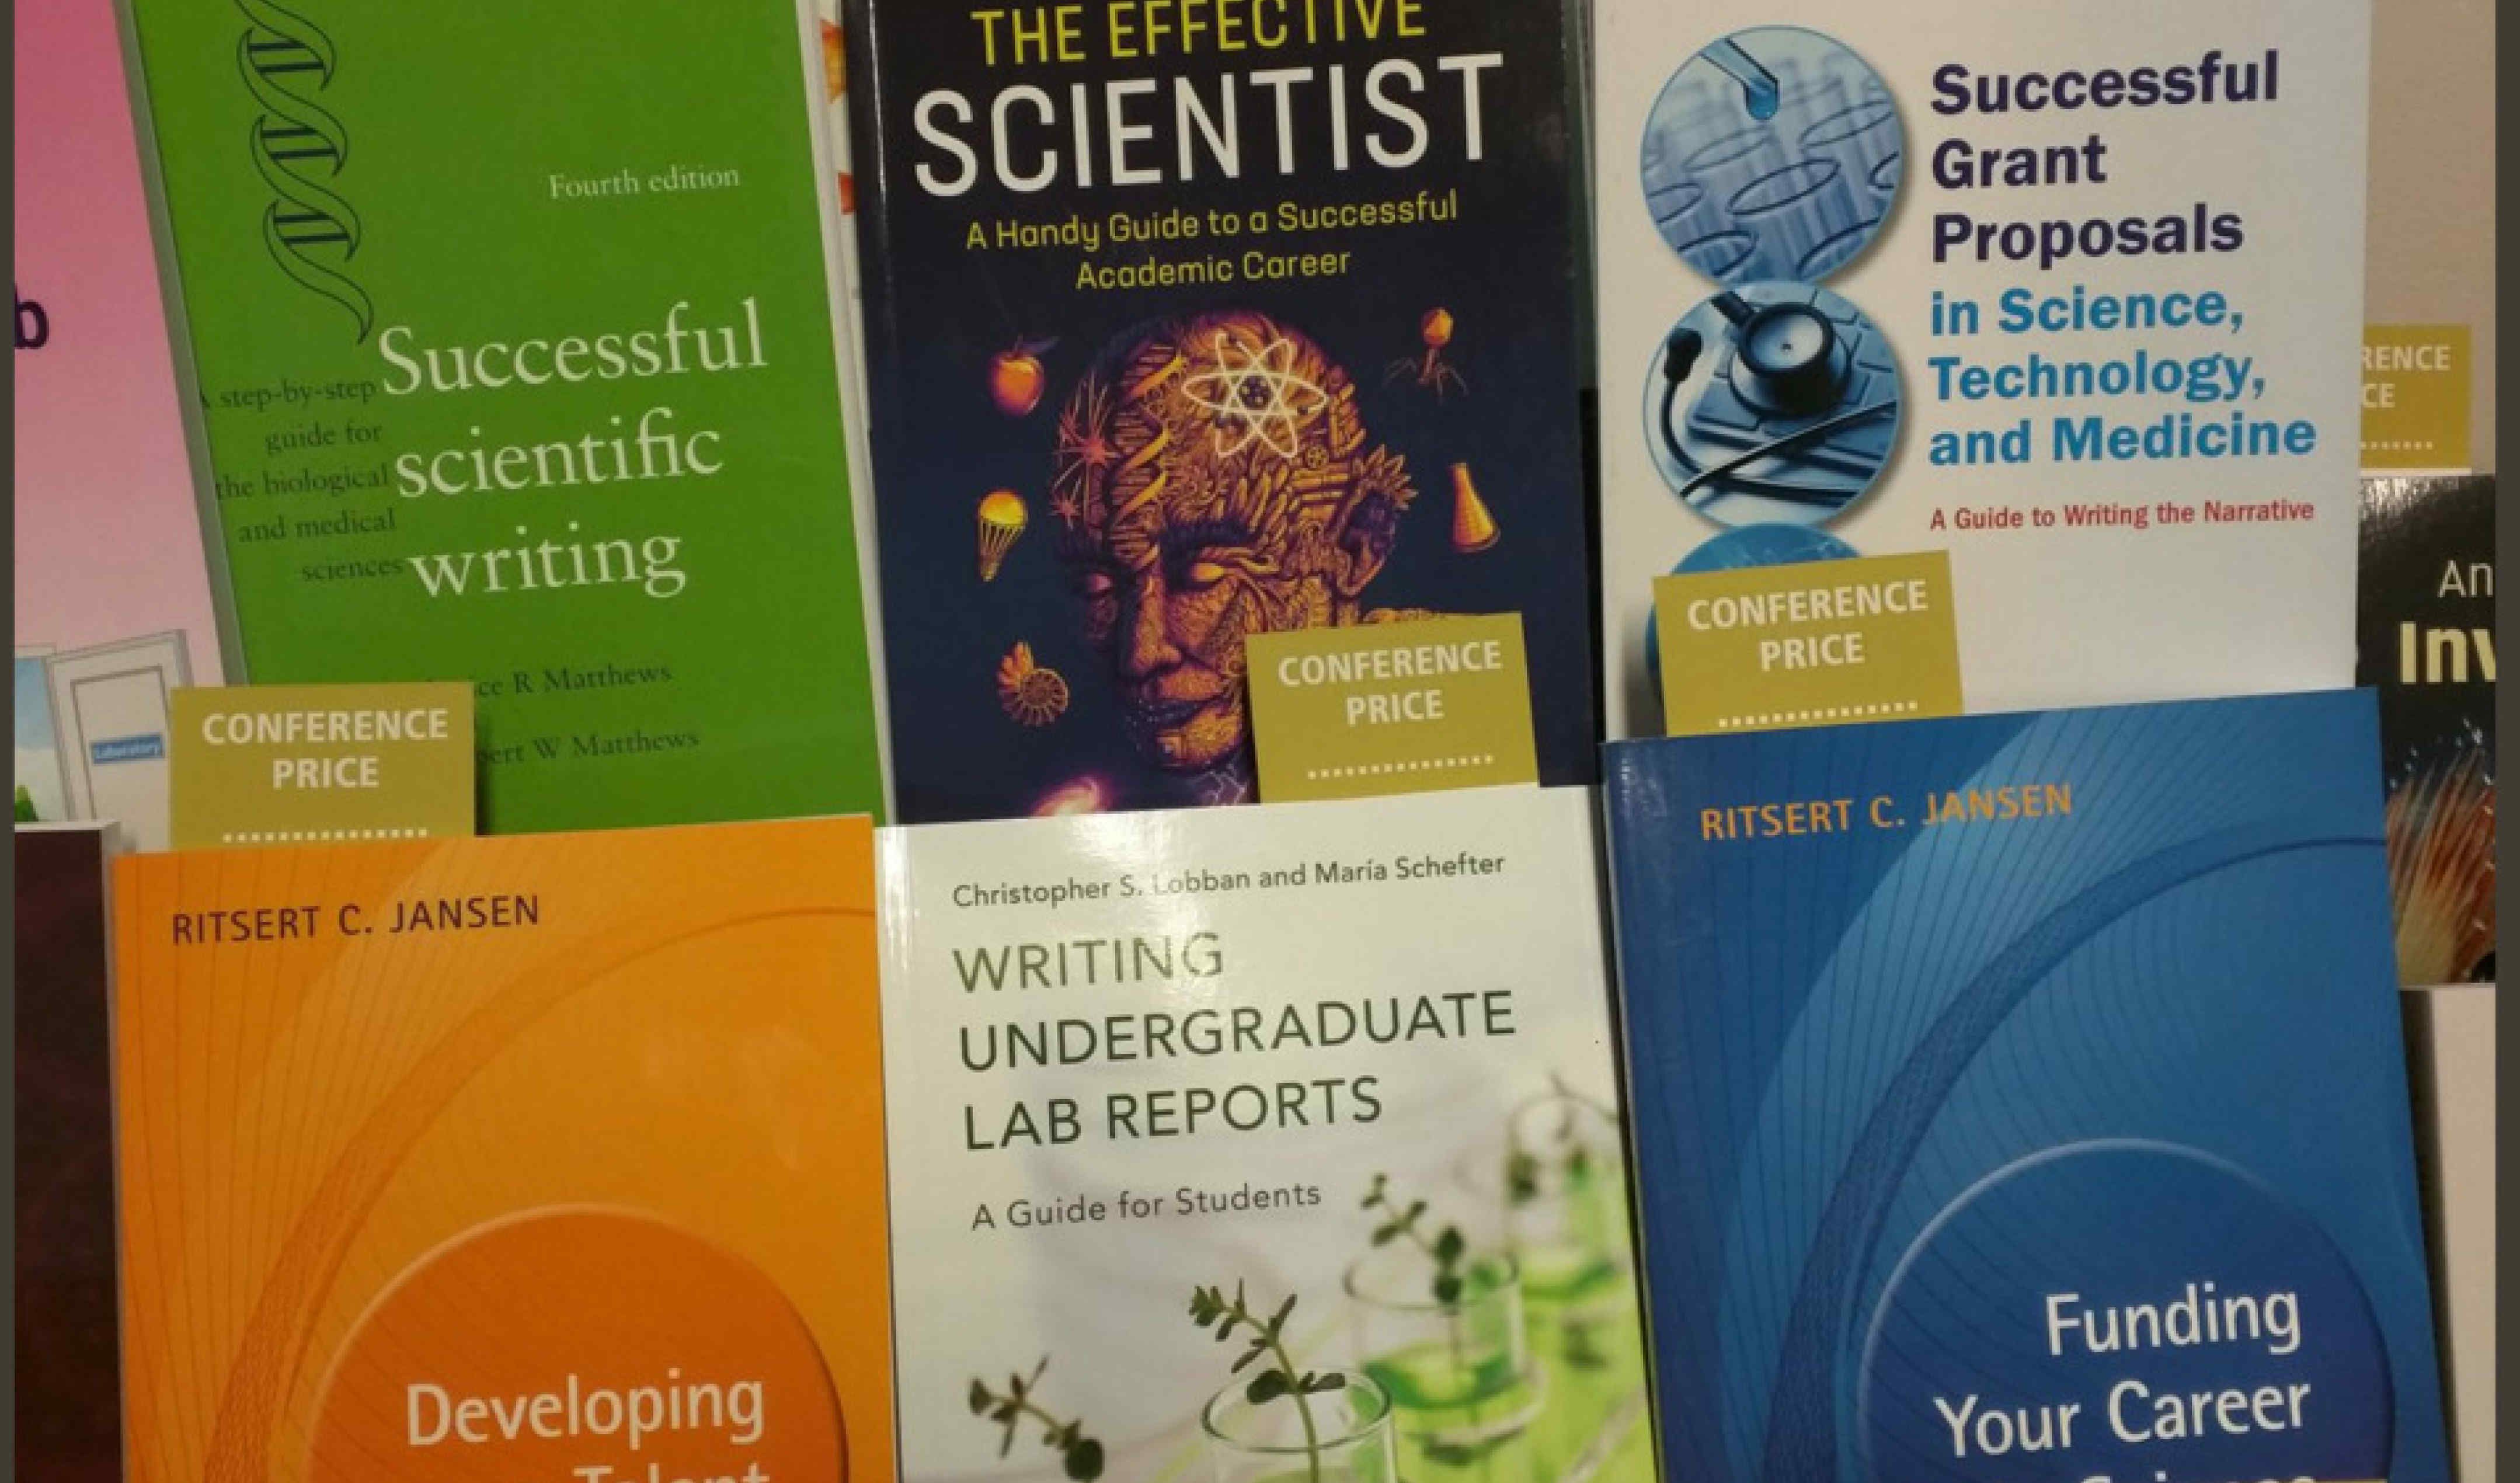 Recommended reading for ALL scientists